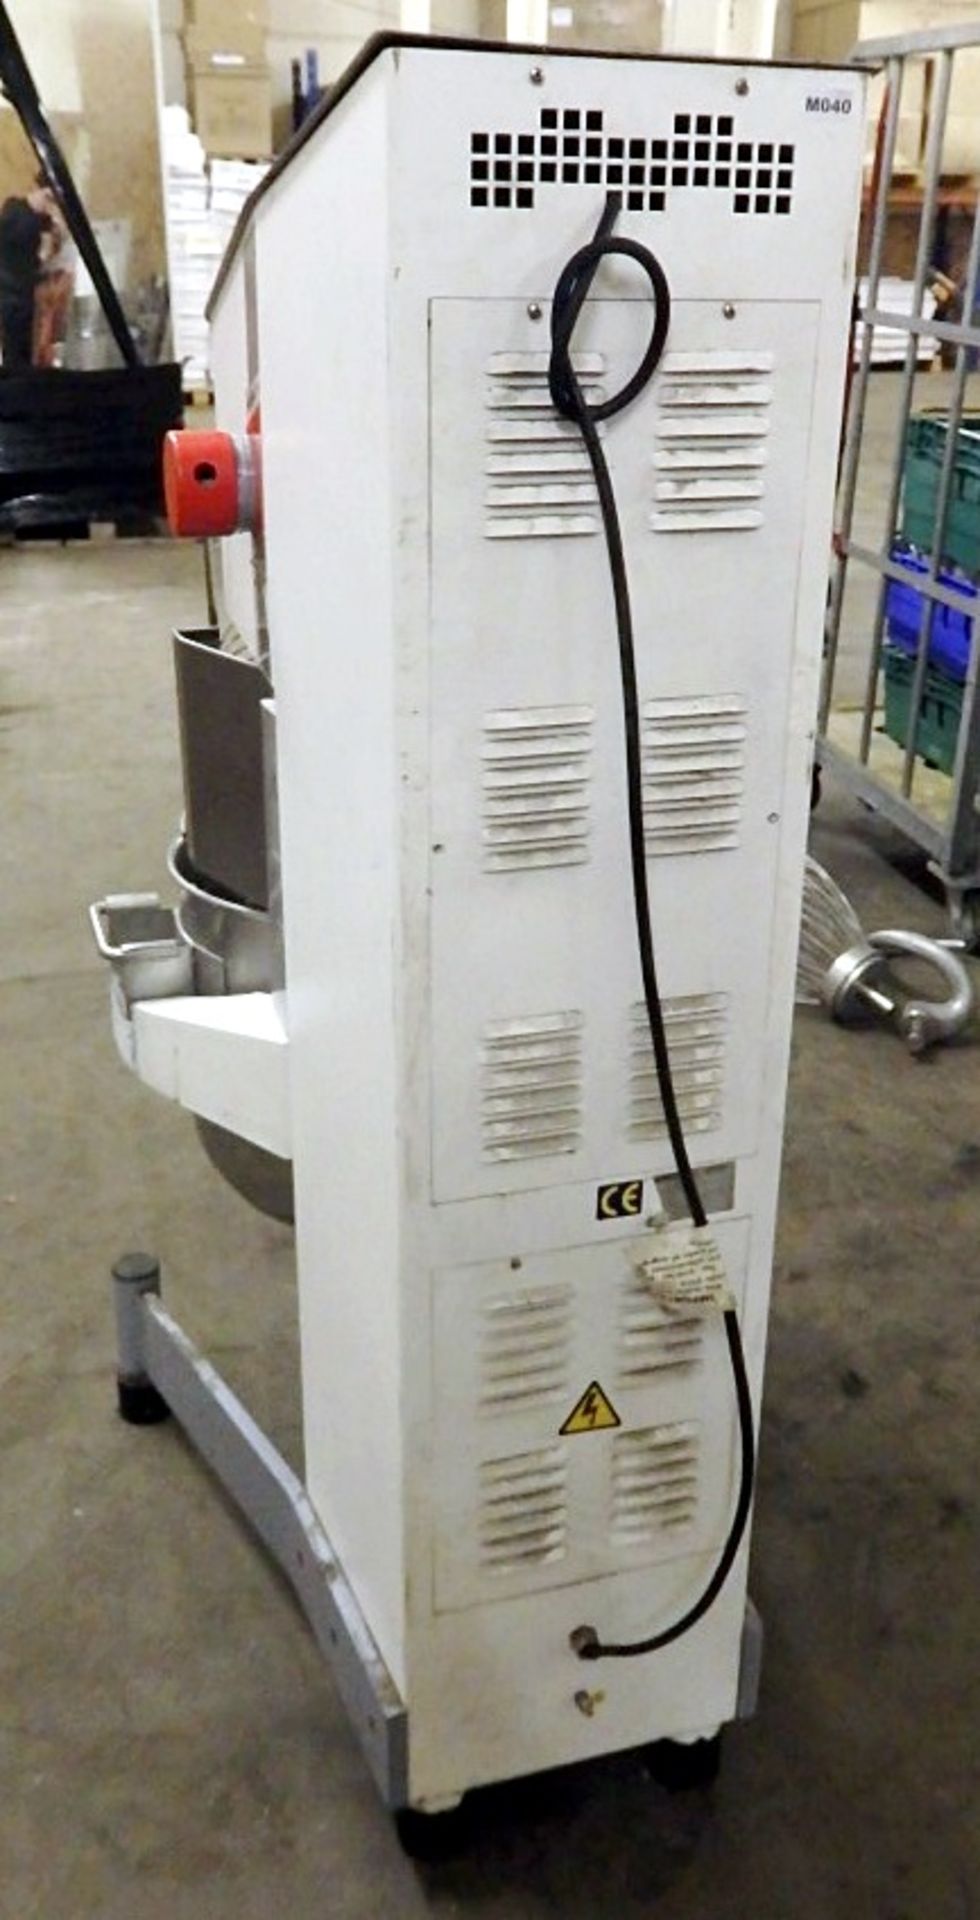 1 x Sammic Planetary Mixer With Whisk, Hook, Paddle - Presented Good Condition - Dimensions: W54 x - Image 4 of 7